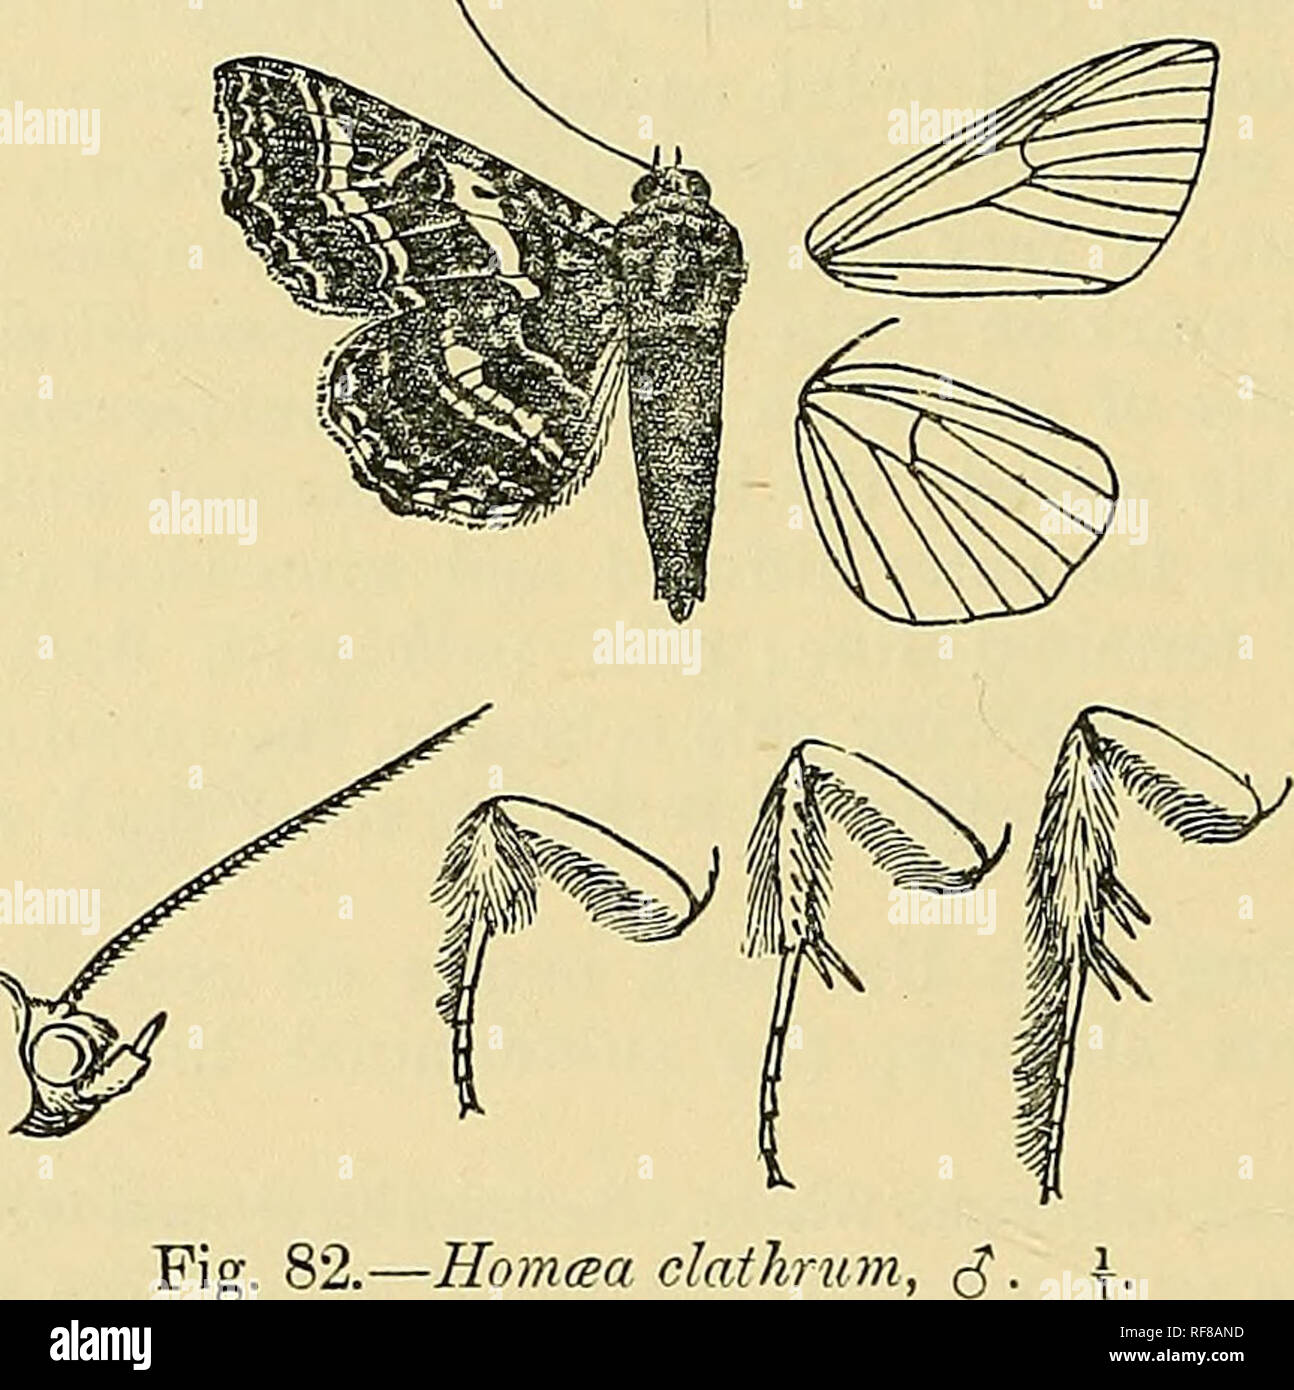 . Catalogue of the Lepidoptera Phalænæ in the British museum. Moths. 384 xoctutd.t:. Genus HOM^A. Homma, Giieii. Noct. iii. p. 206 (1852) Type. clathrum. Proboscis fully developecl ; palpi upturned, the 2nd joint hardly reaching to vertex of head and moderately scaled, the 3rd long and somewhat acuminate at tip ; frons smooth, with tuft of hair above; eyes large, round ; antennse of male ciliated ; thorax clothed with hair and scales mixed and without crests; tibite of male and the hind tarsi above typically fringed with long hair, the fore and hind tibire not spined ; abdomen smoothly scaled  Stock Photo